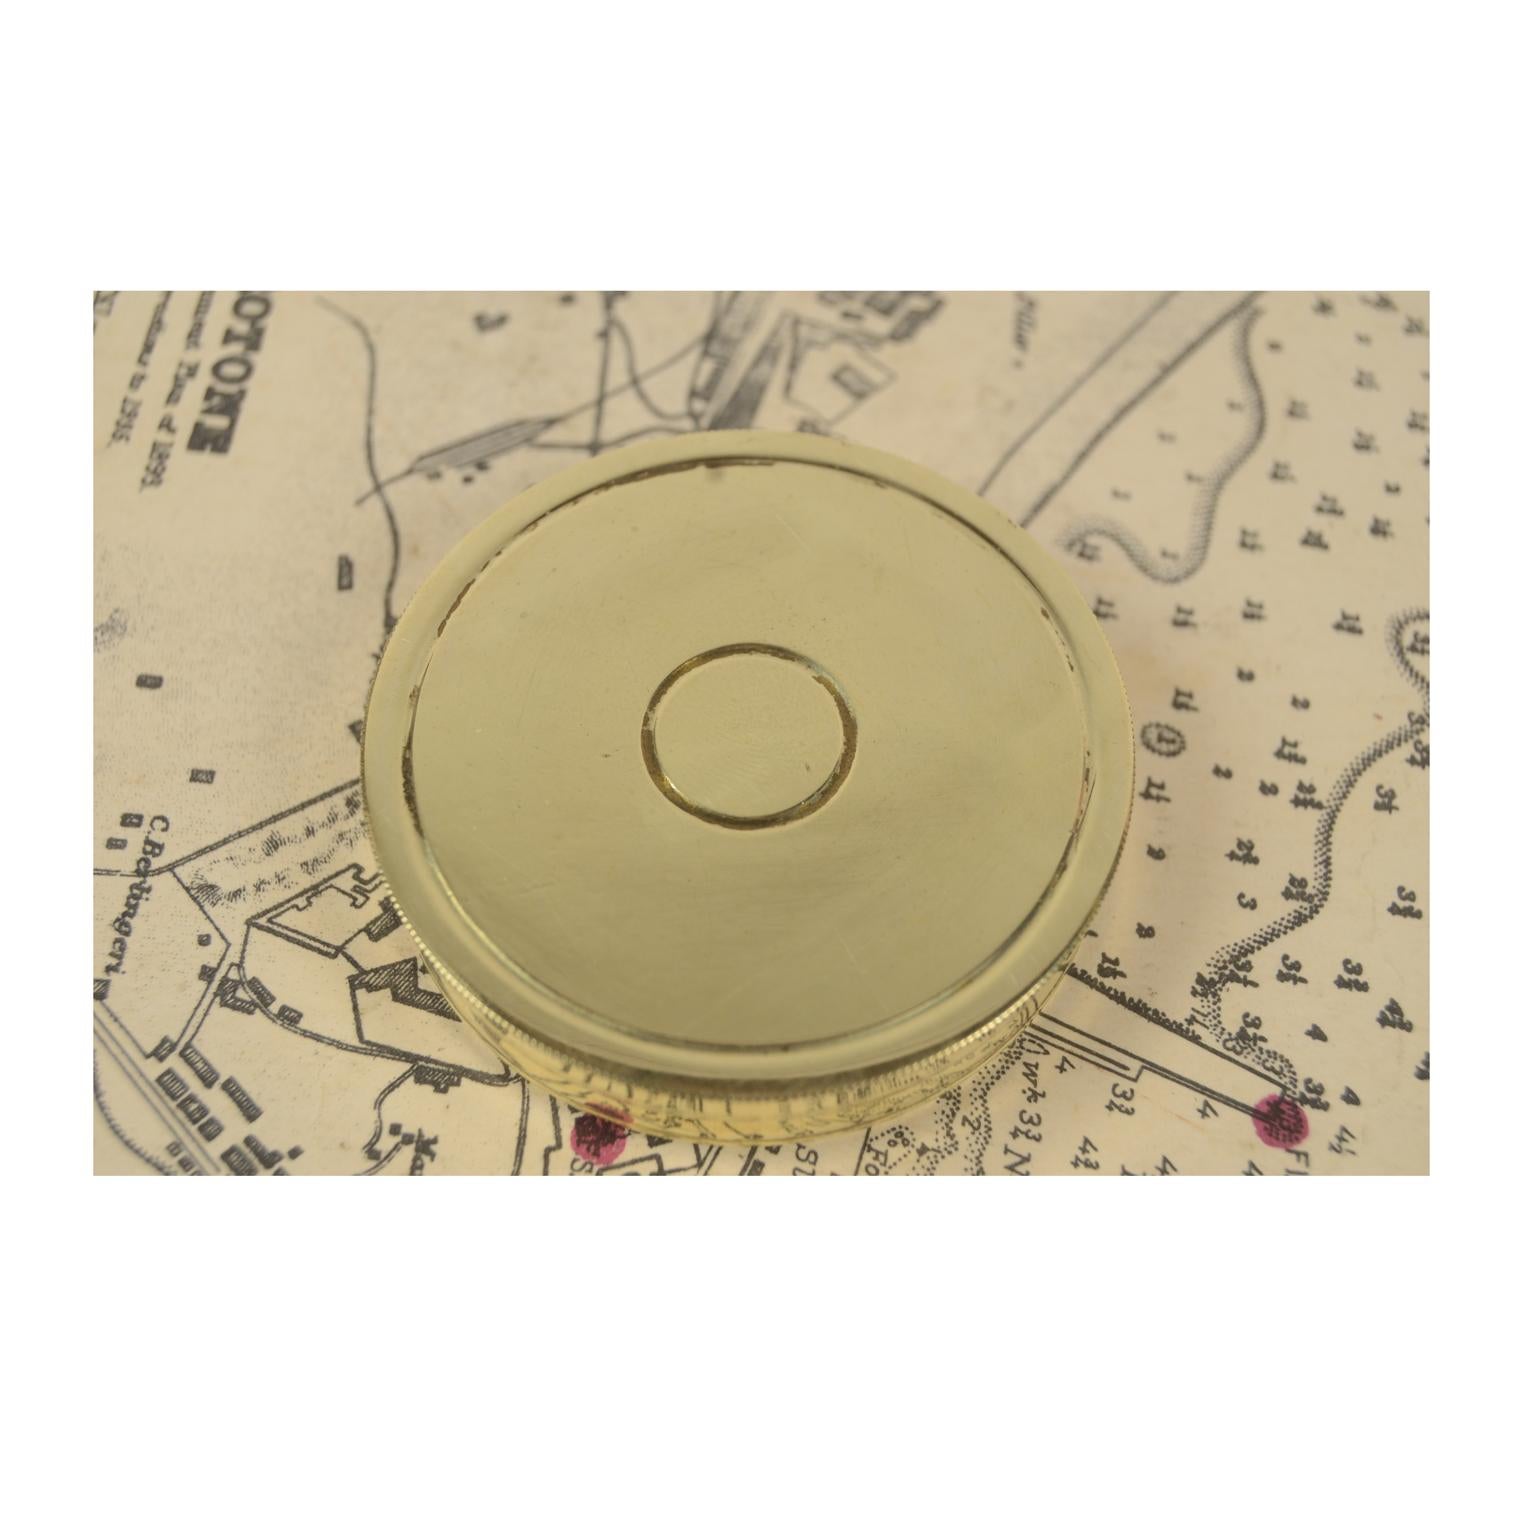 Early 20th Century 1900s French Manufacture Antique Pocket Magnetic Compass Made of Turned Brass 